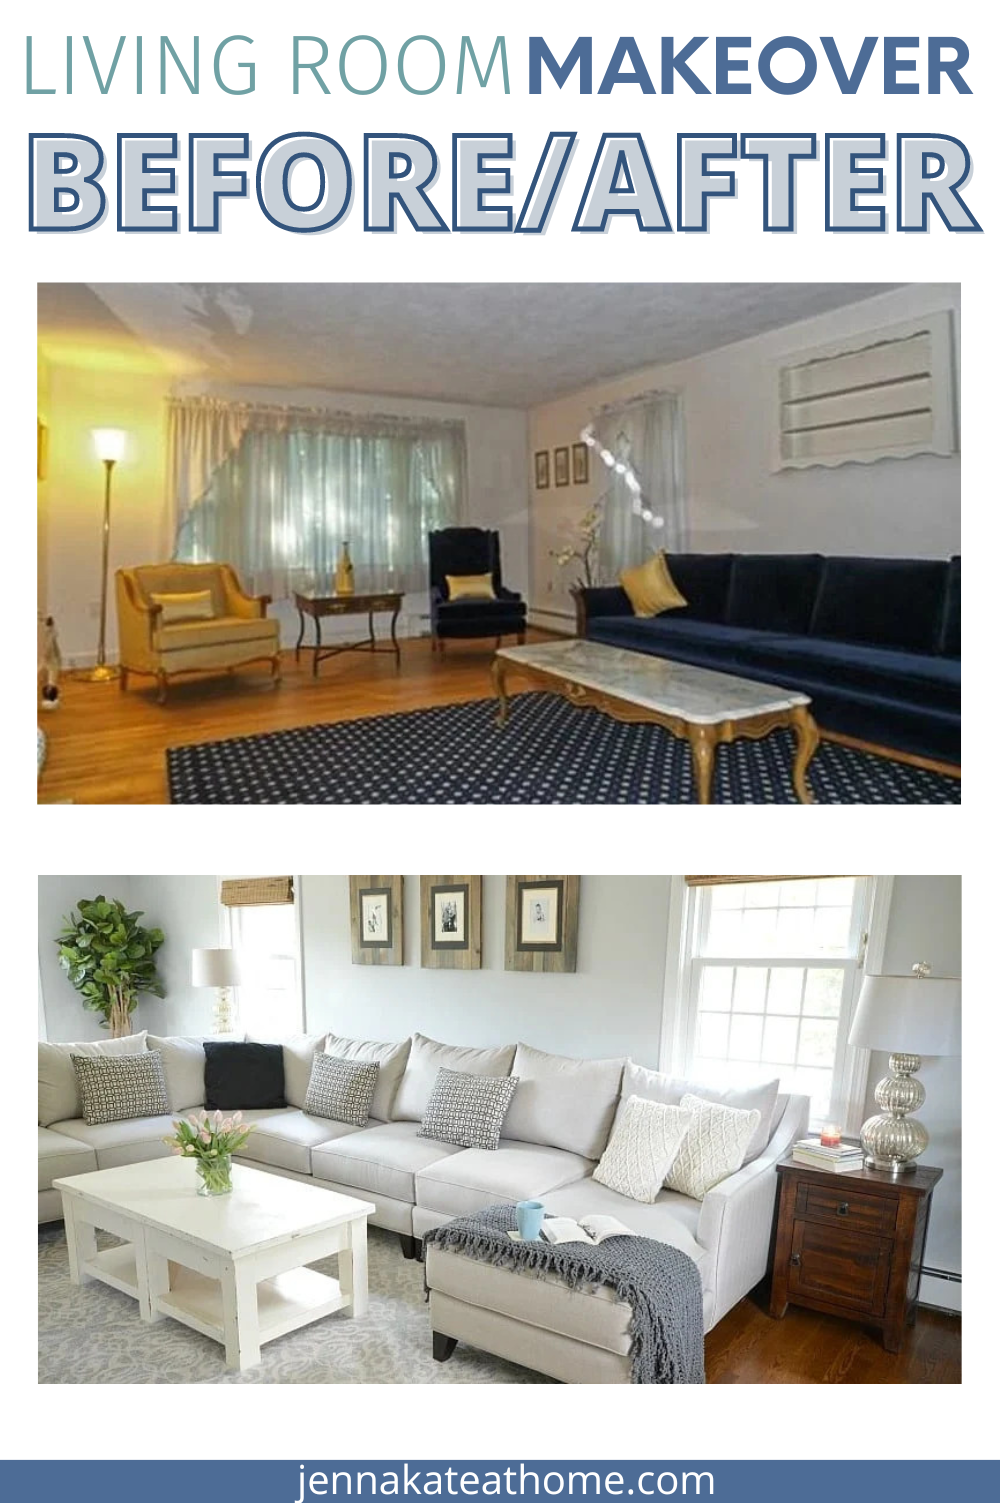 Living room makeover before and afters